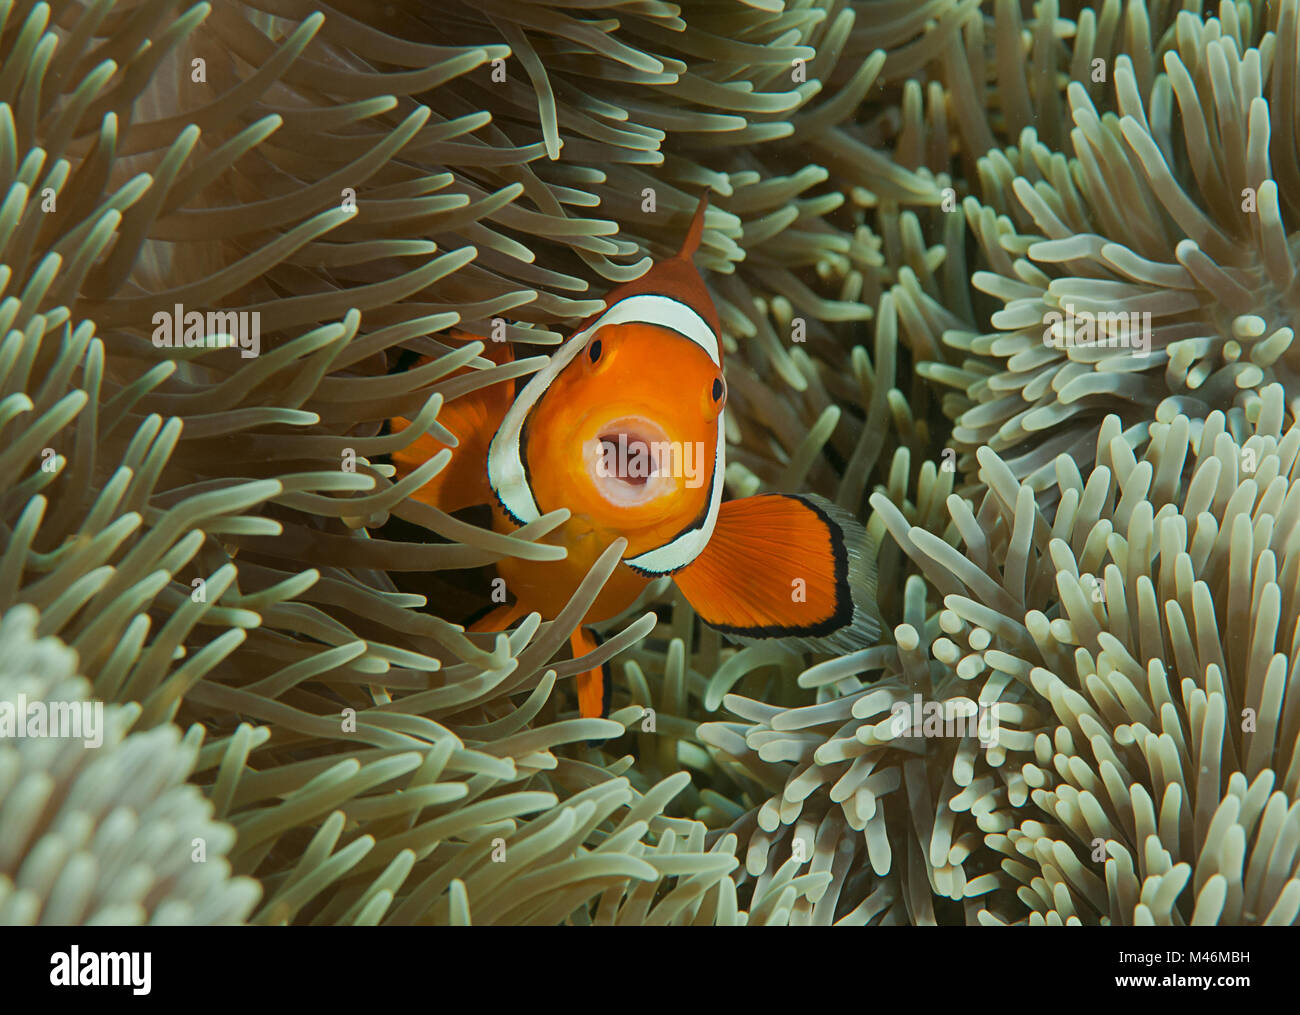 Singing ocellaris clownfish ( Aphiprion ocellaris ) or false clown anemonefish shelters itself among the venomous tentacles of magnificent sea anemone Stock Photo